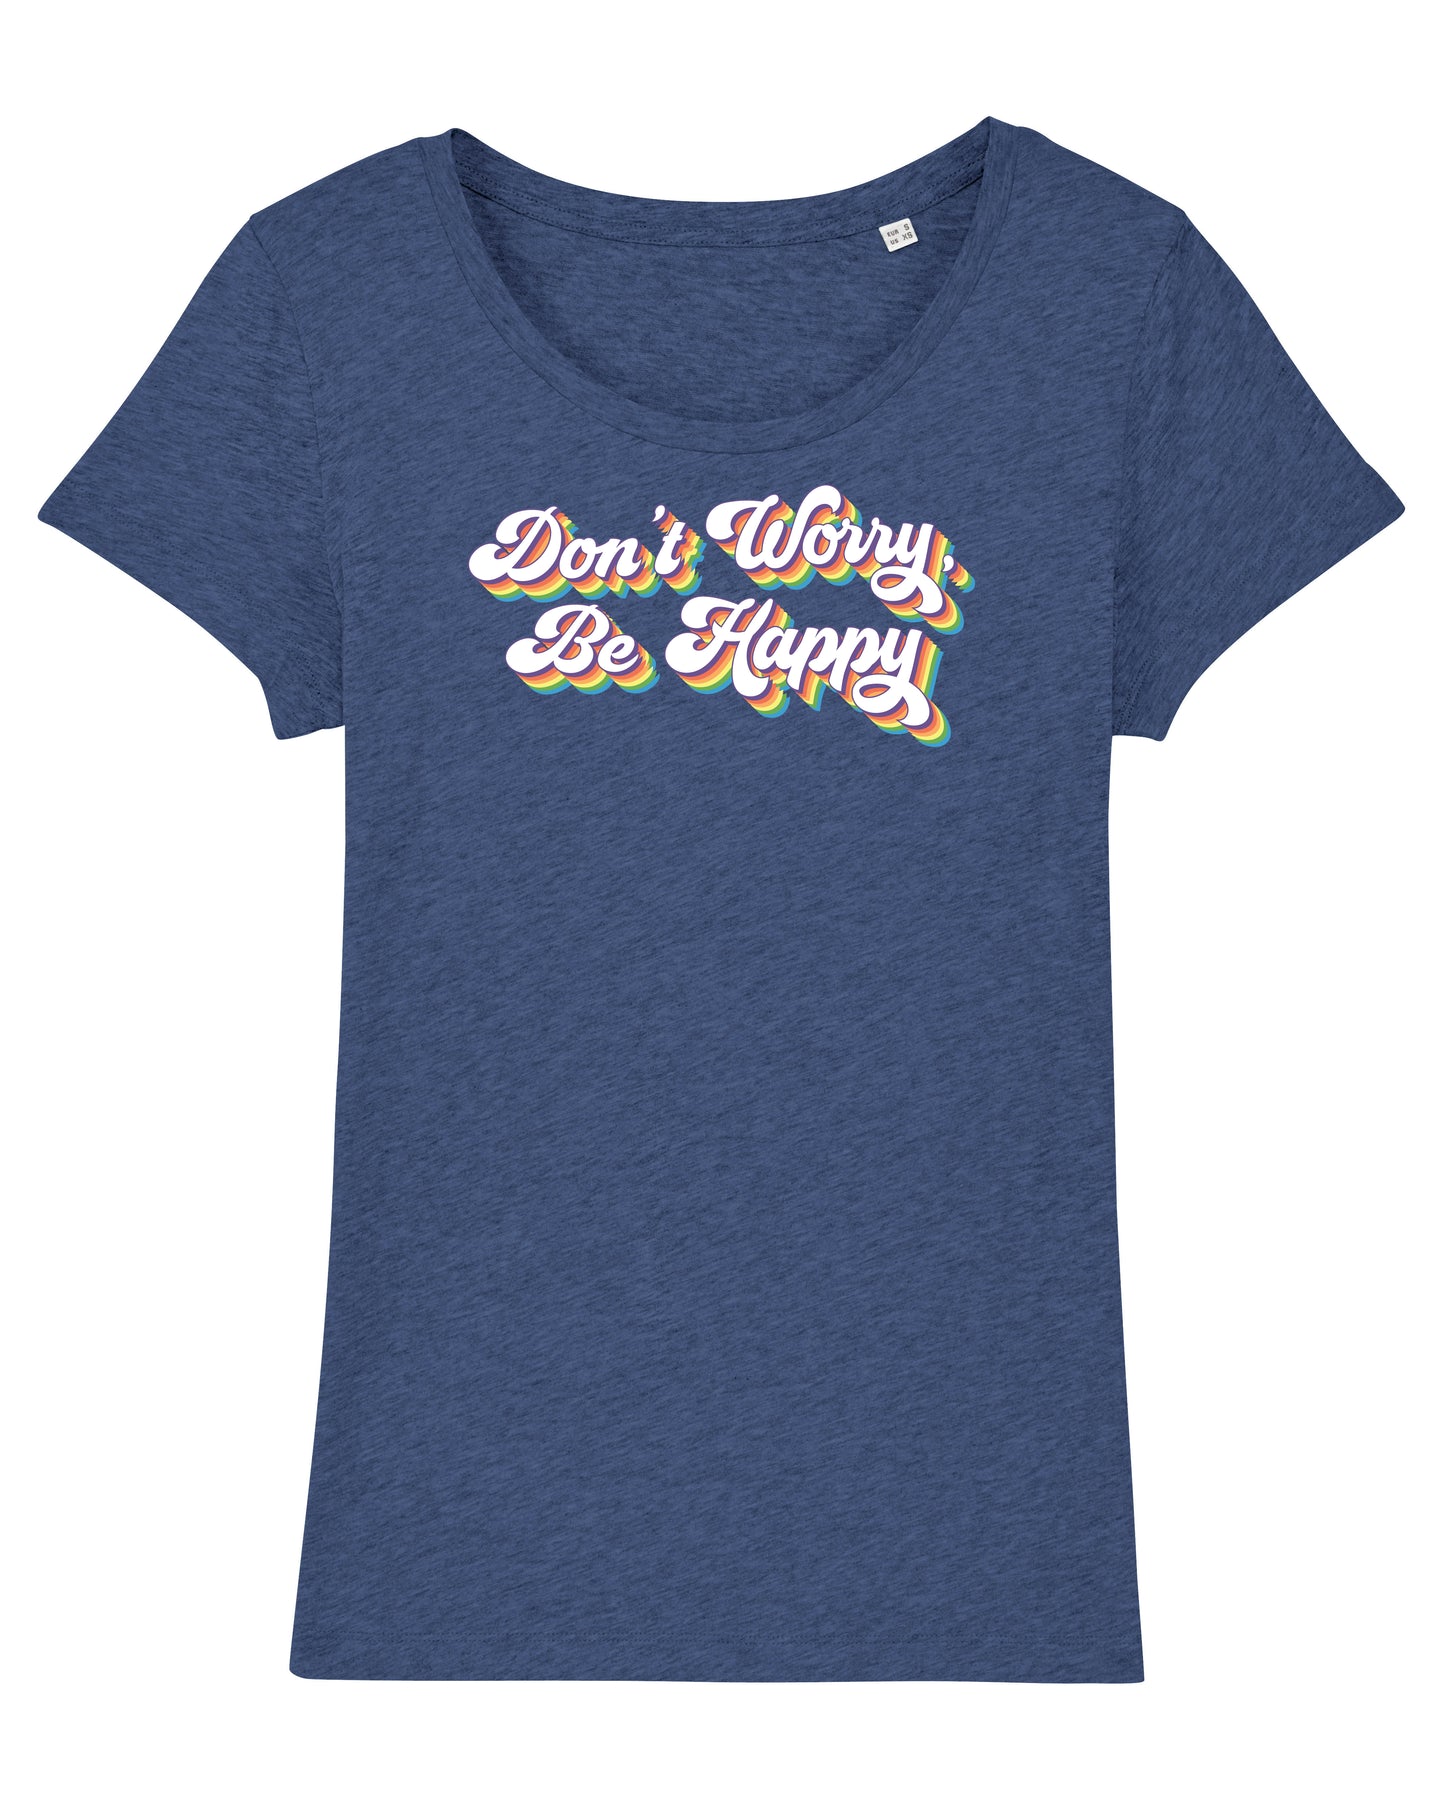 Don't Worry Be Happy Women's T-Shirt